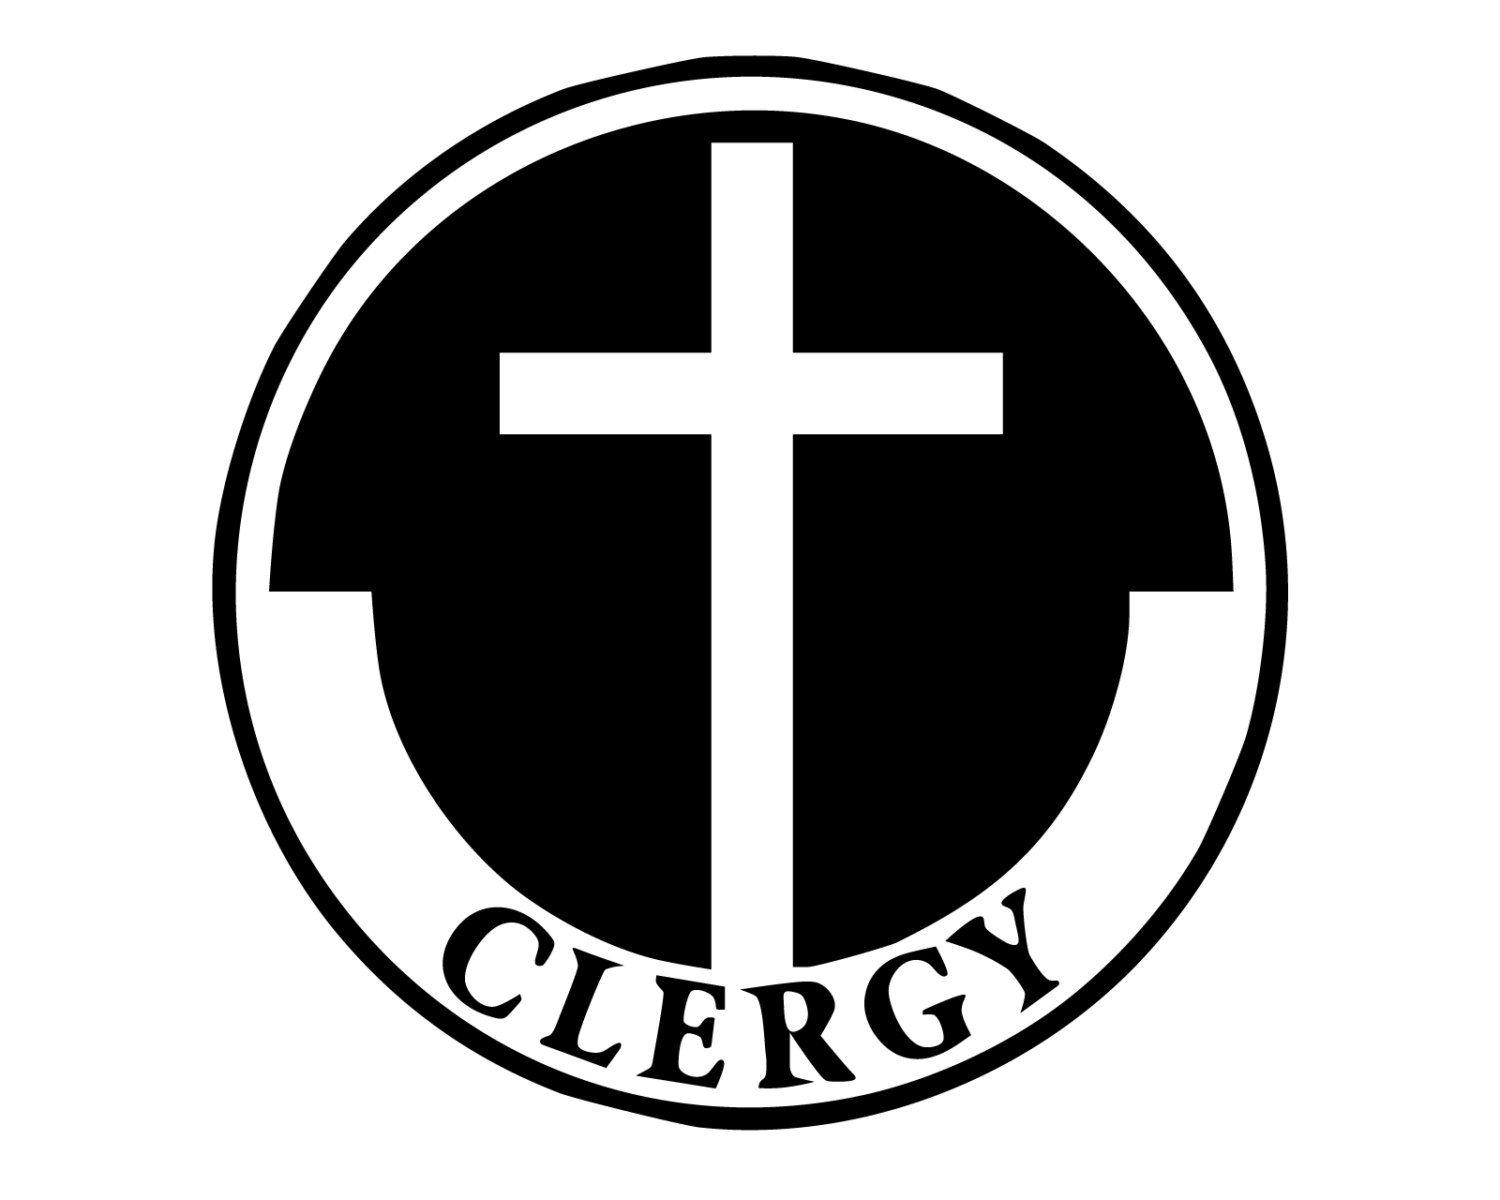 Clergy Logo - Clergy Decal Clergy Pastor Sticker Religious Clergy Cross